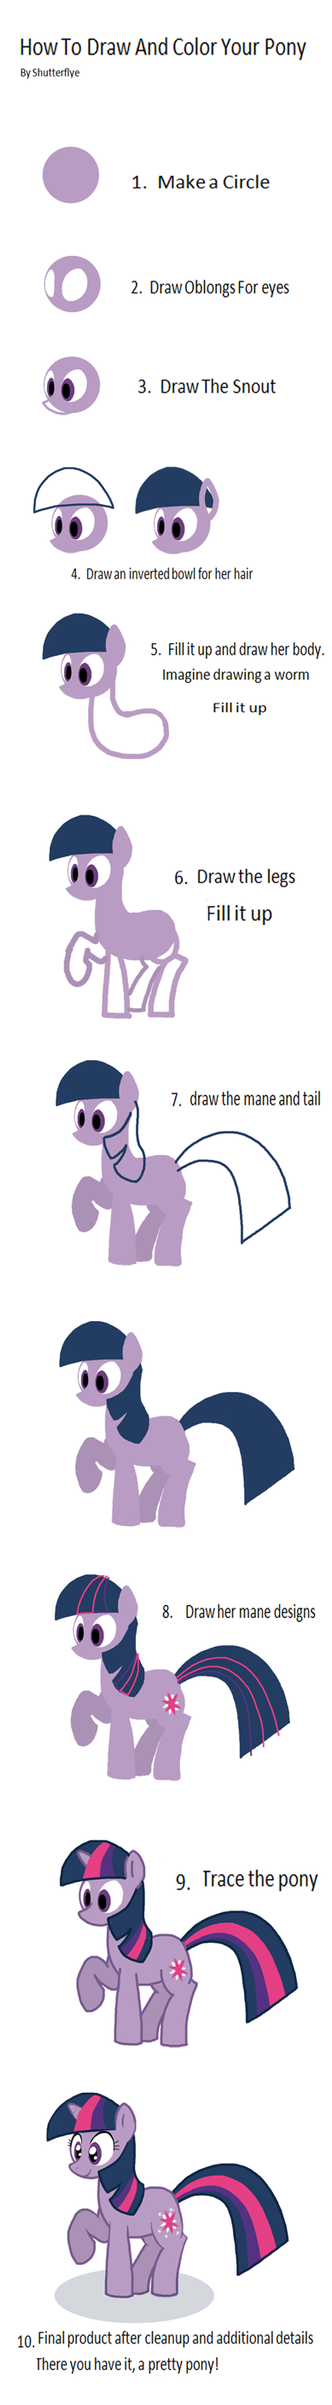 [Bild: drawing_pony_the_easy_way_by_shutterflye-d3i7215.png]